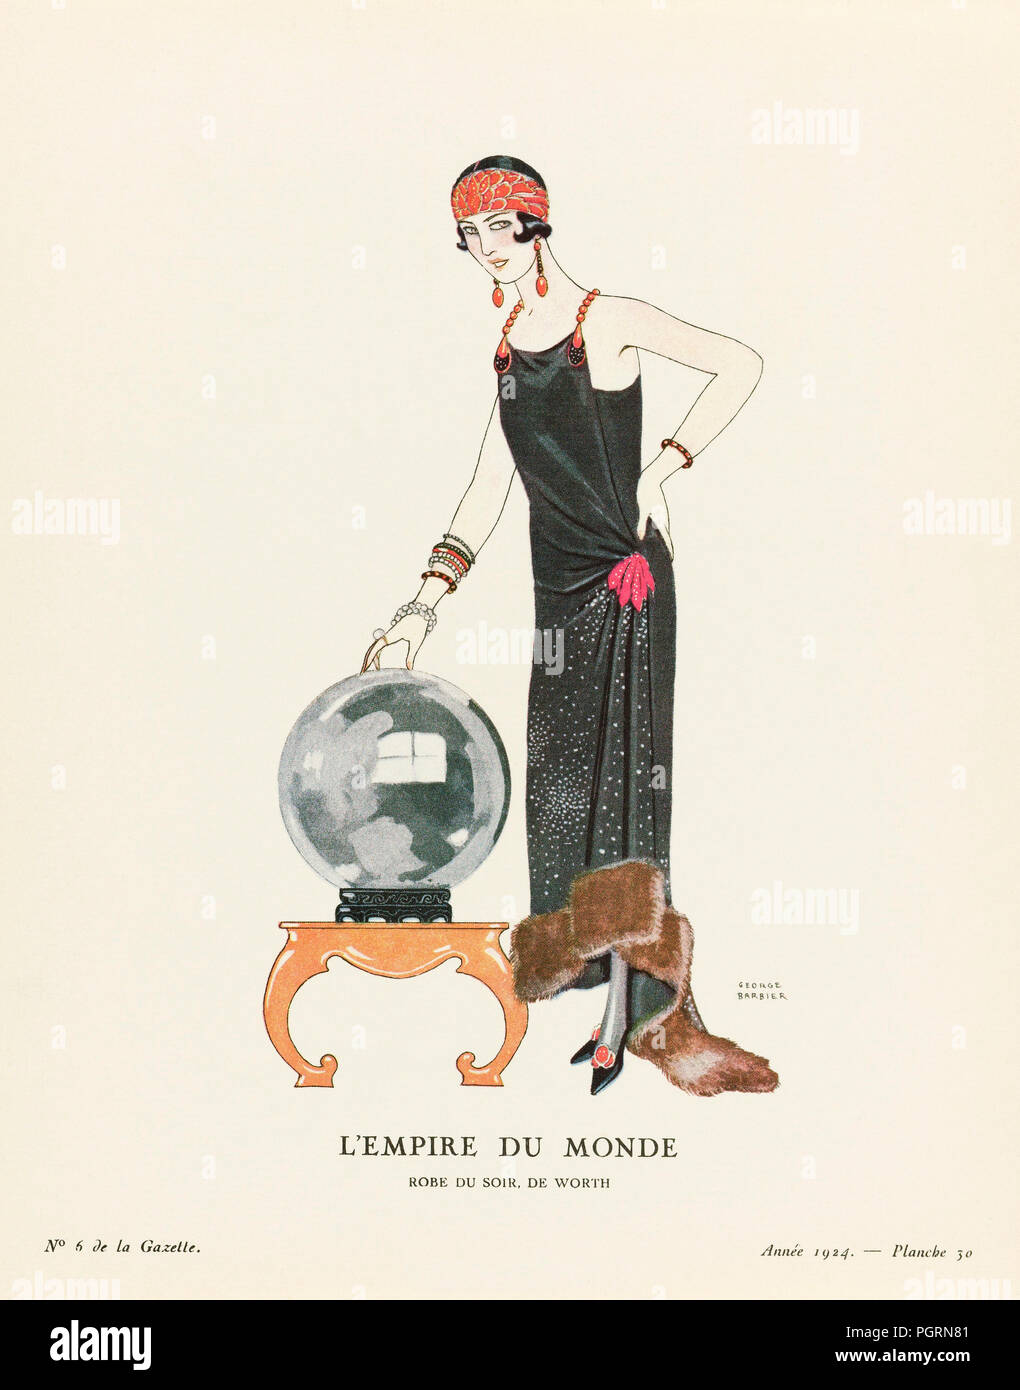 L‘Empire du Monde.  The Empire of the World.  Robe du Soir, de Worth.  Evening dress by Worth.  Art-deco fashion illustration by French artist George Barbier, 1882-1932.  The work was created for the Gazette du Bon Ton, a Parisian fashion magazine published between 1912-1915 and 1919-1925. Stock Photo